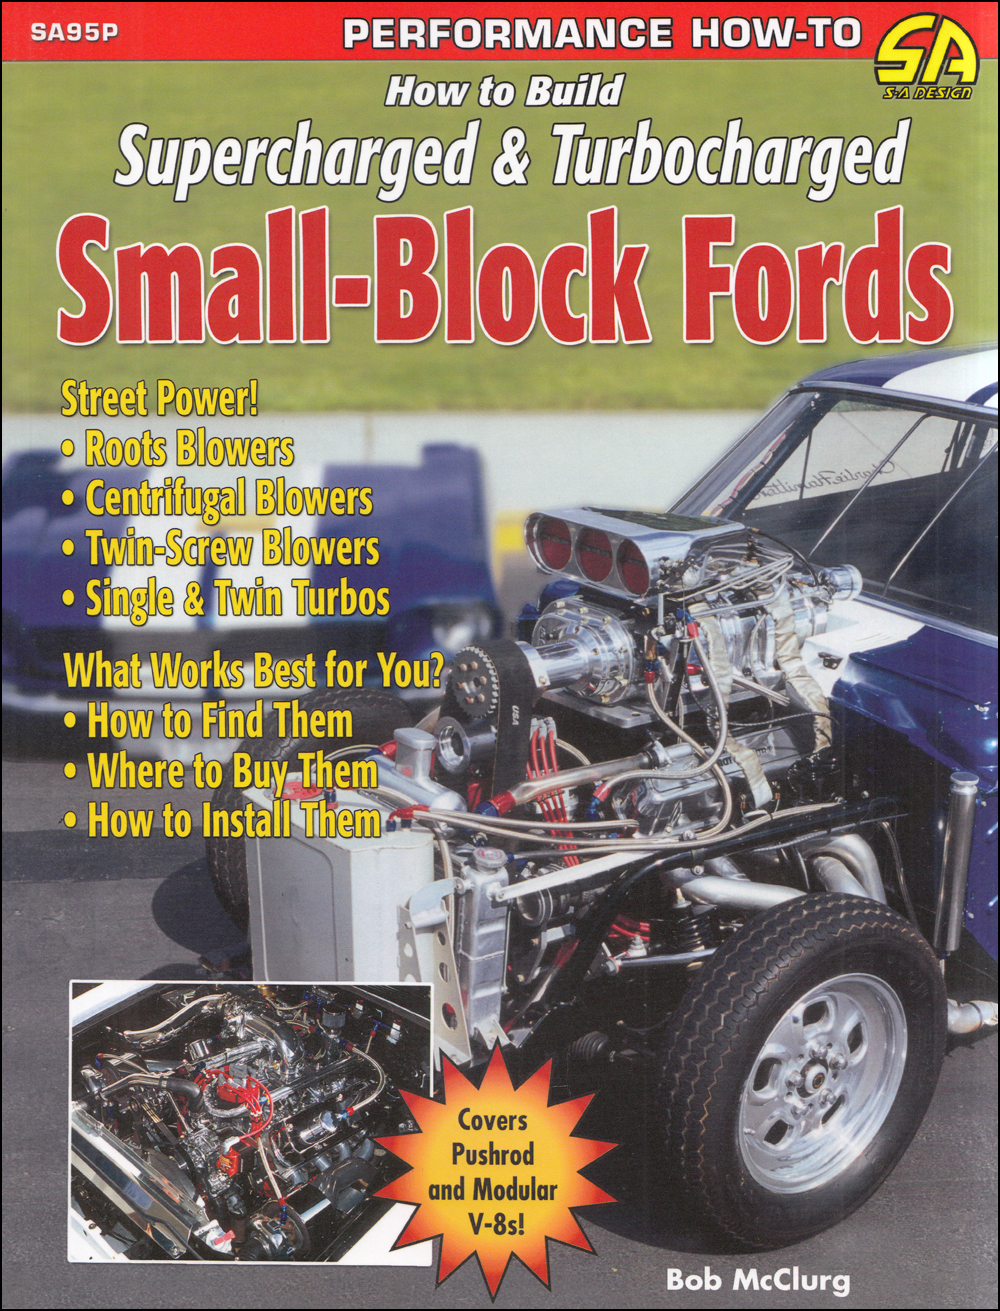 How to Build Supercharged and Turbocharged Small-Block Fords